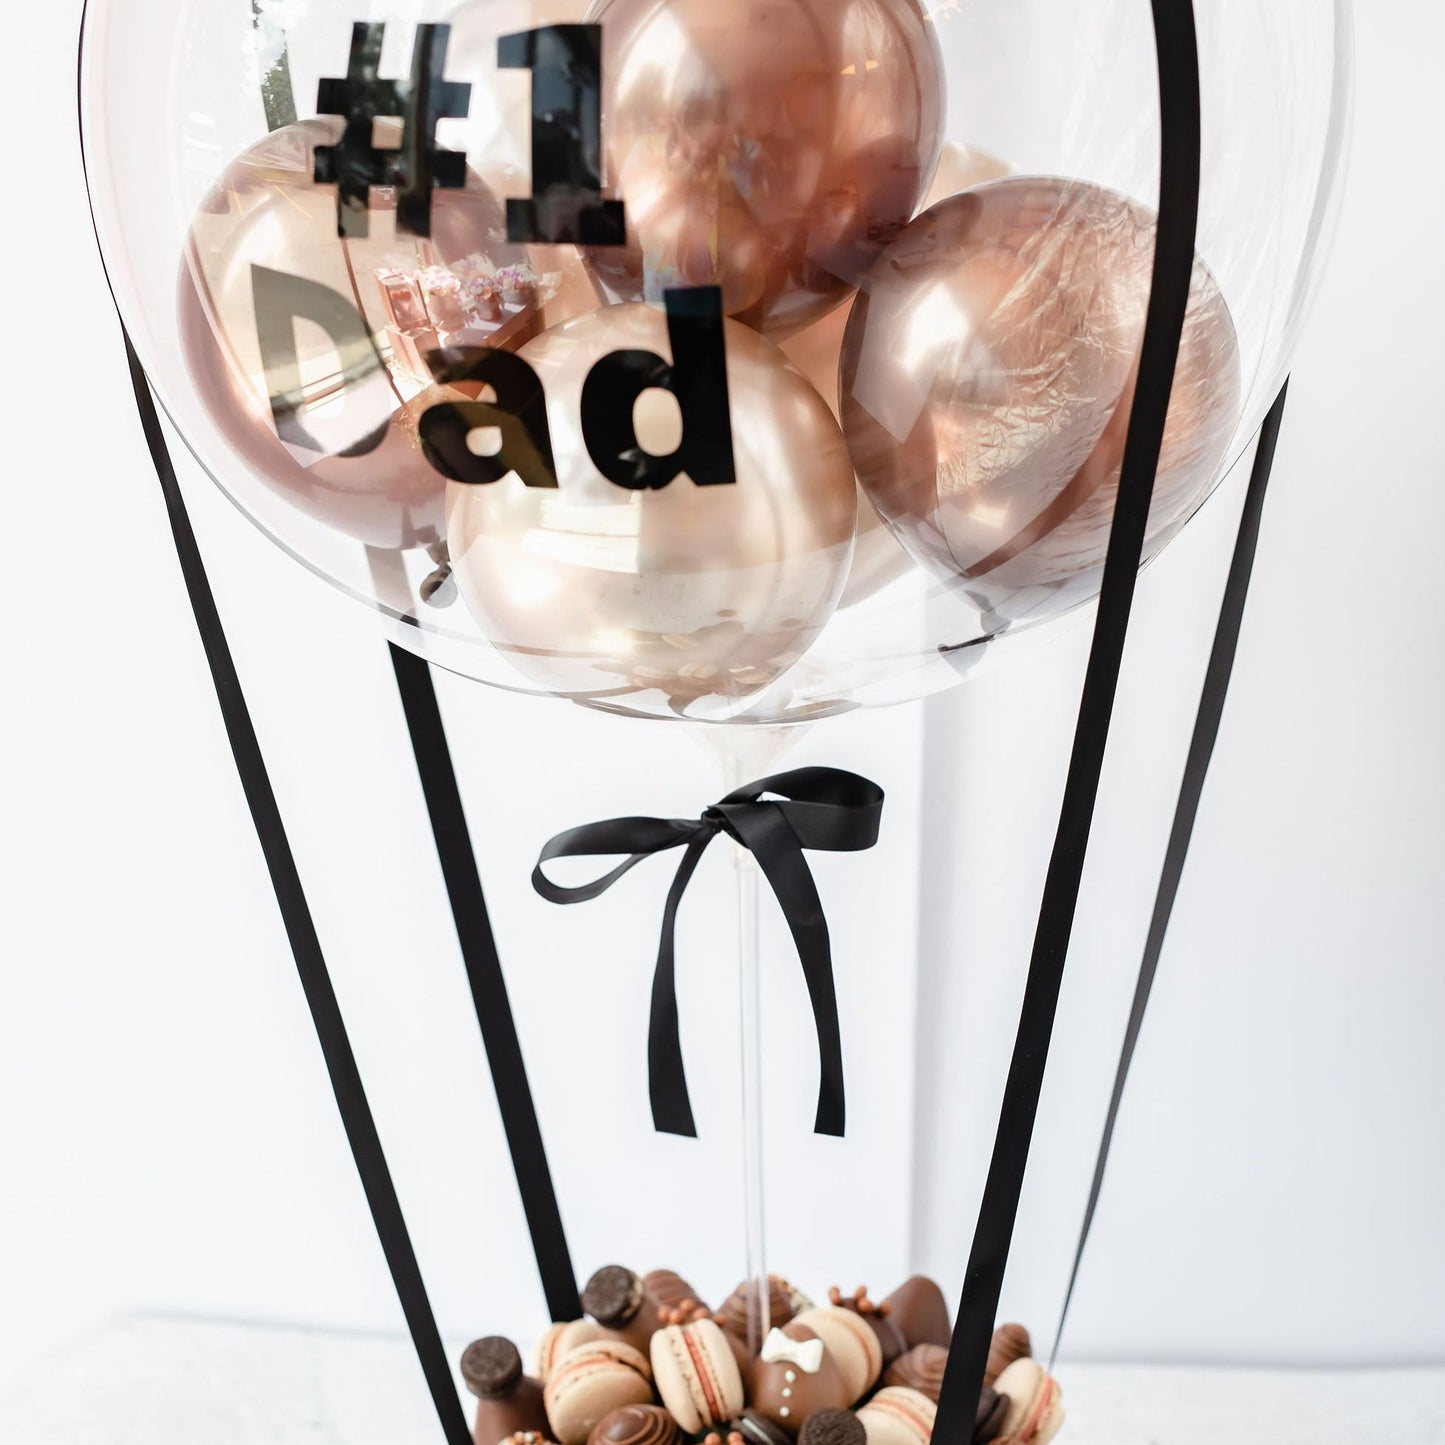 Up, Up & Away Bouquet: #1 Dad